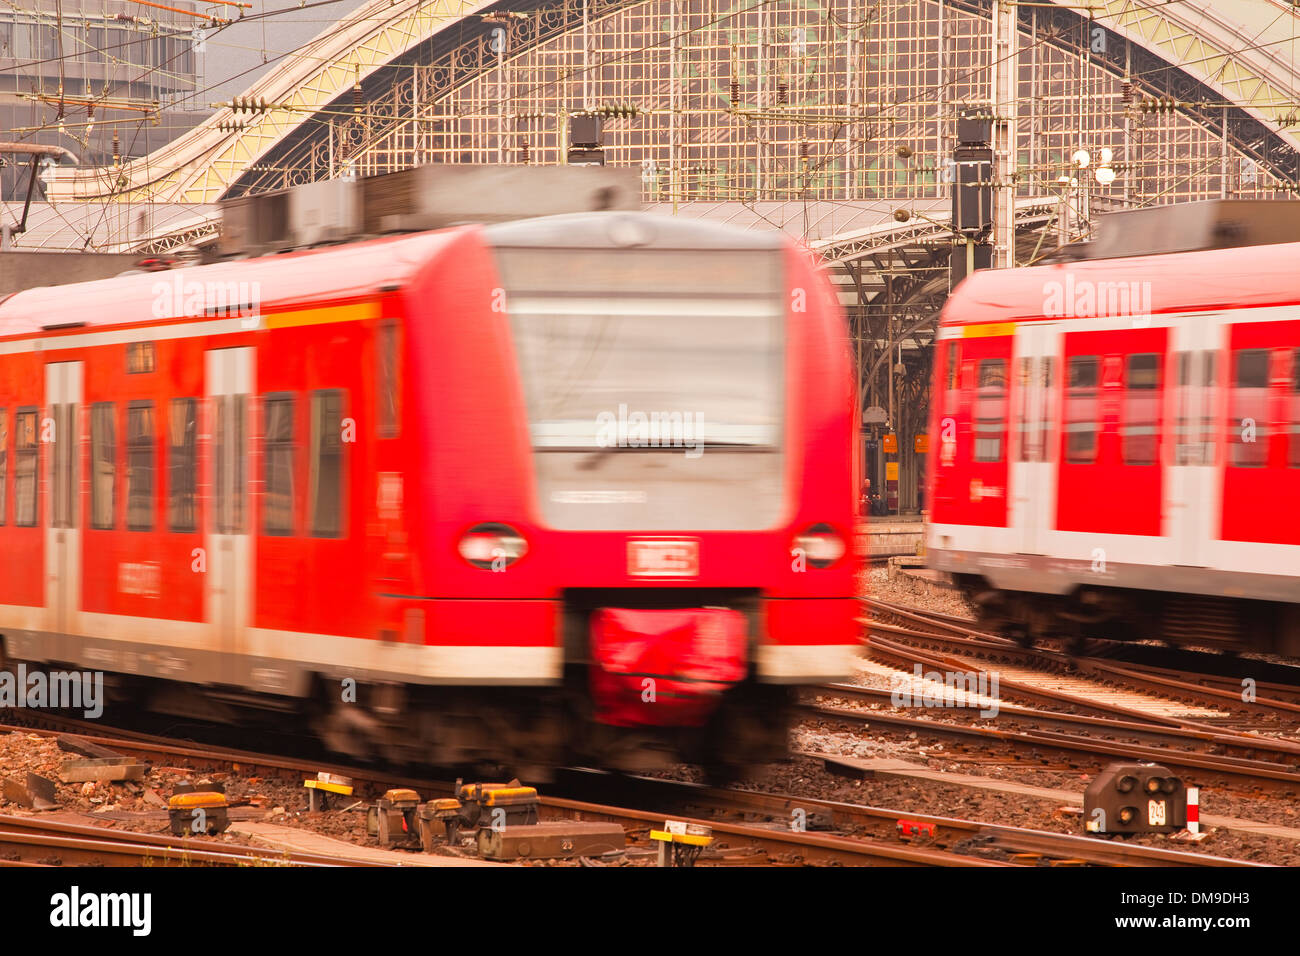 Koln or Cologne HBF railway station in Germany. Stock Photo